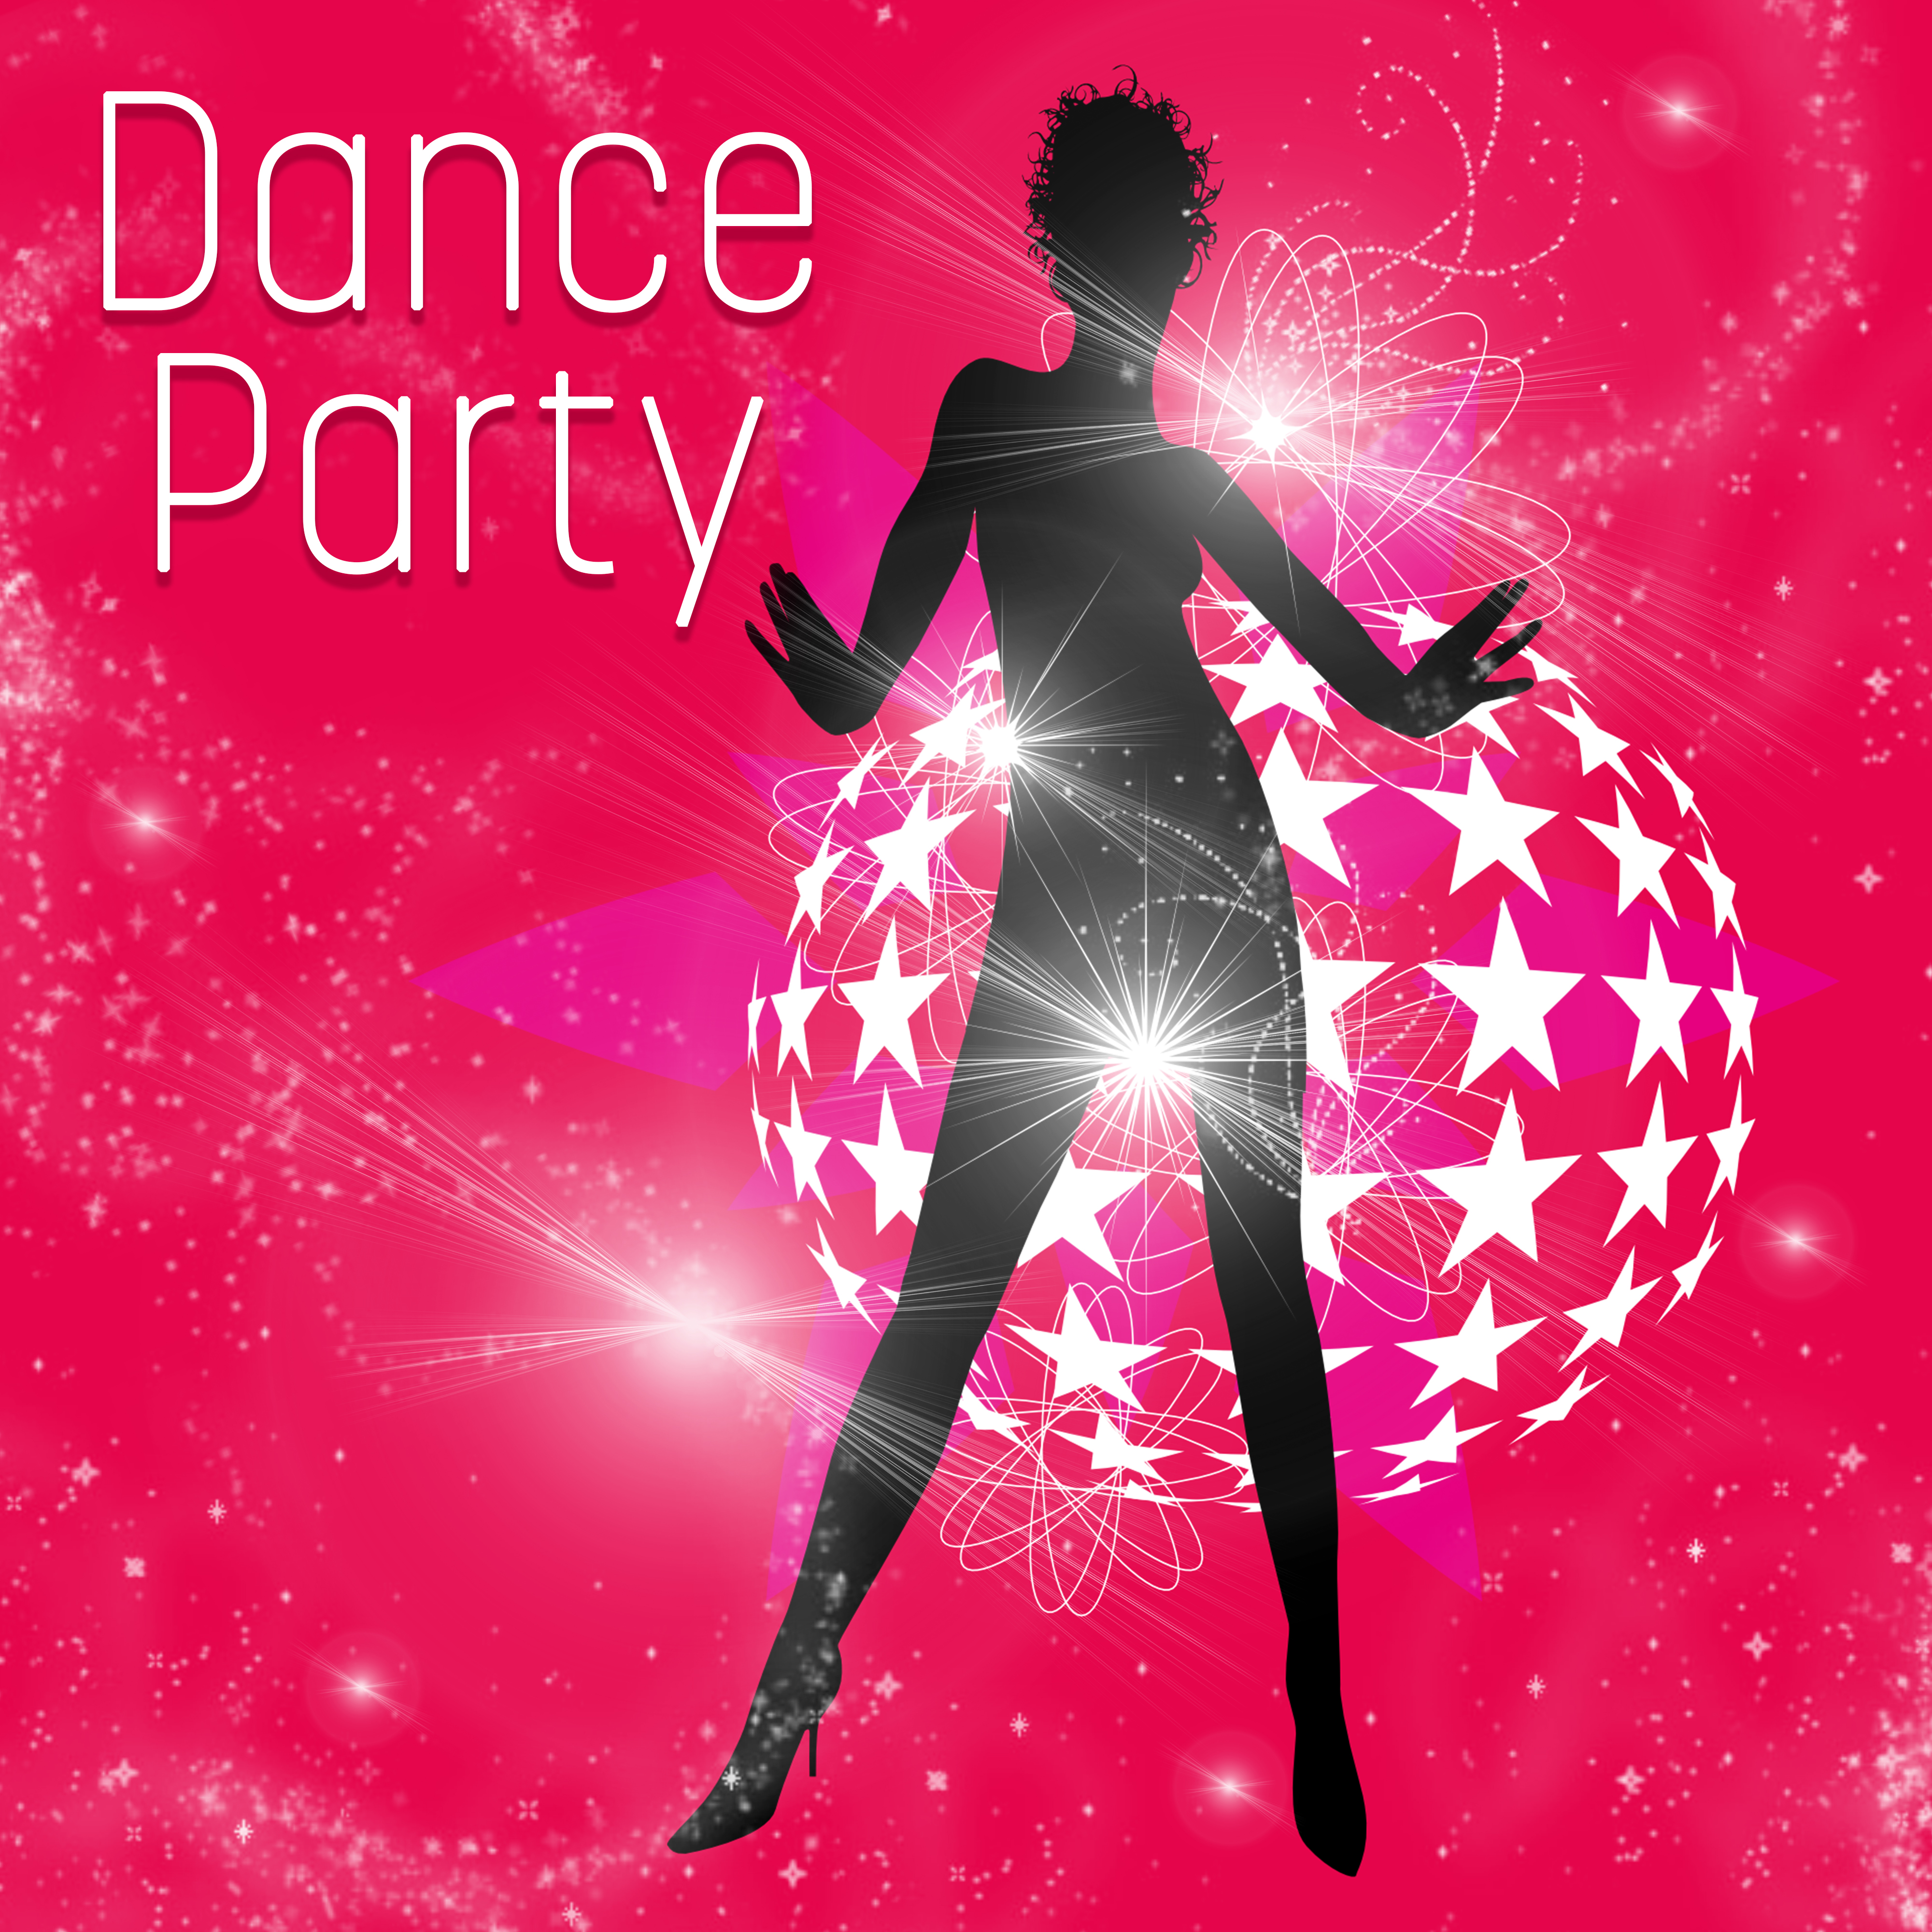 Dance Party – Ibiza Lounge, Beach Chill, Summertime, Drink Bar, Holiday Chill Out, Sexy Vibes, Electronic Music